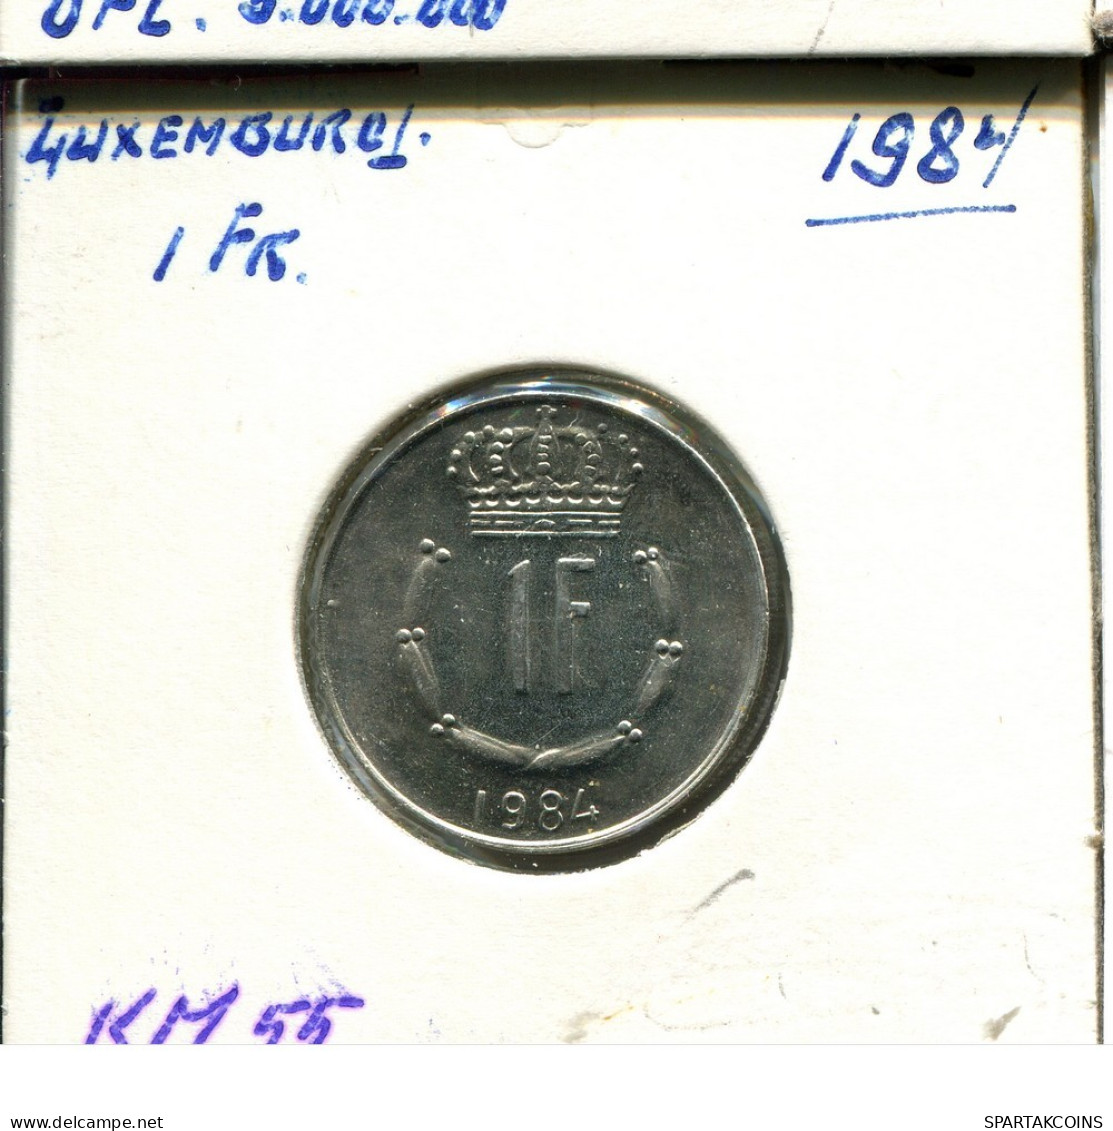 1 FRANC 1984 LUXEMBOURG Coin #AT220.U.A - Luxemburg